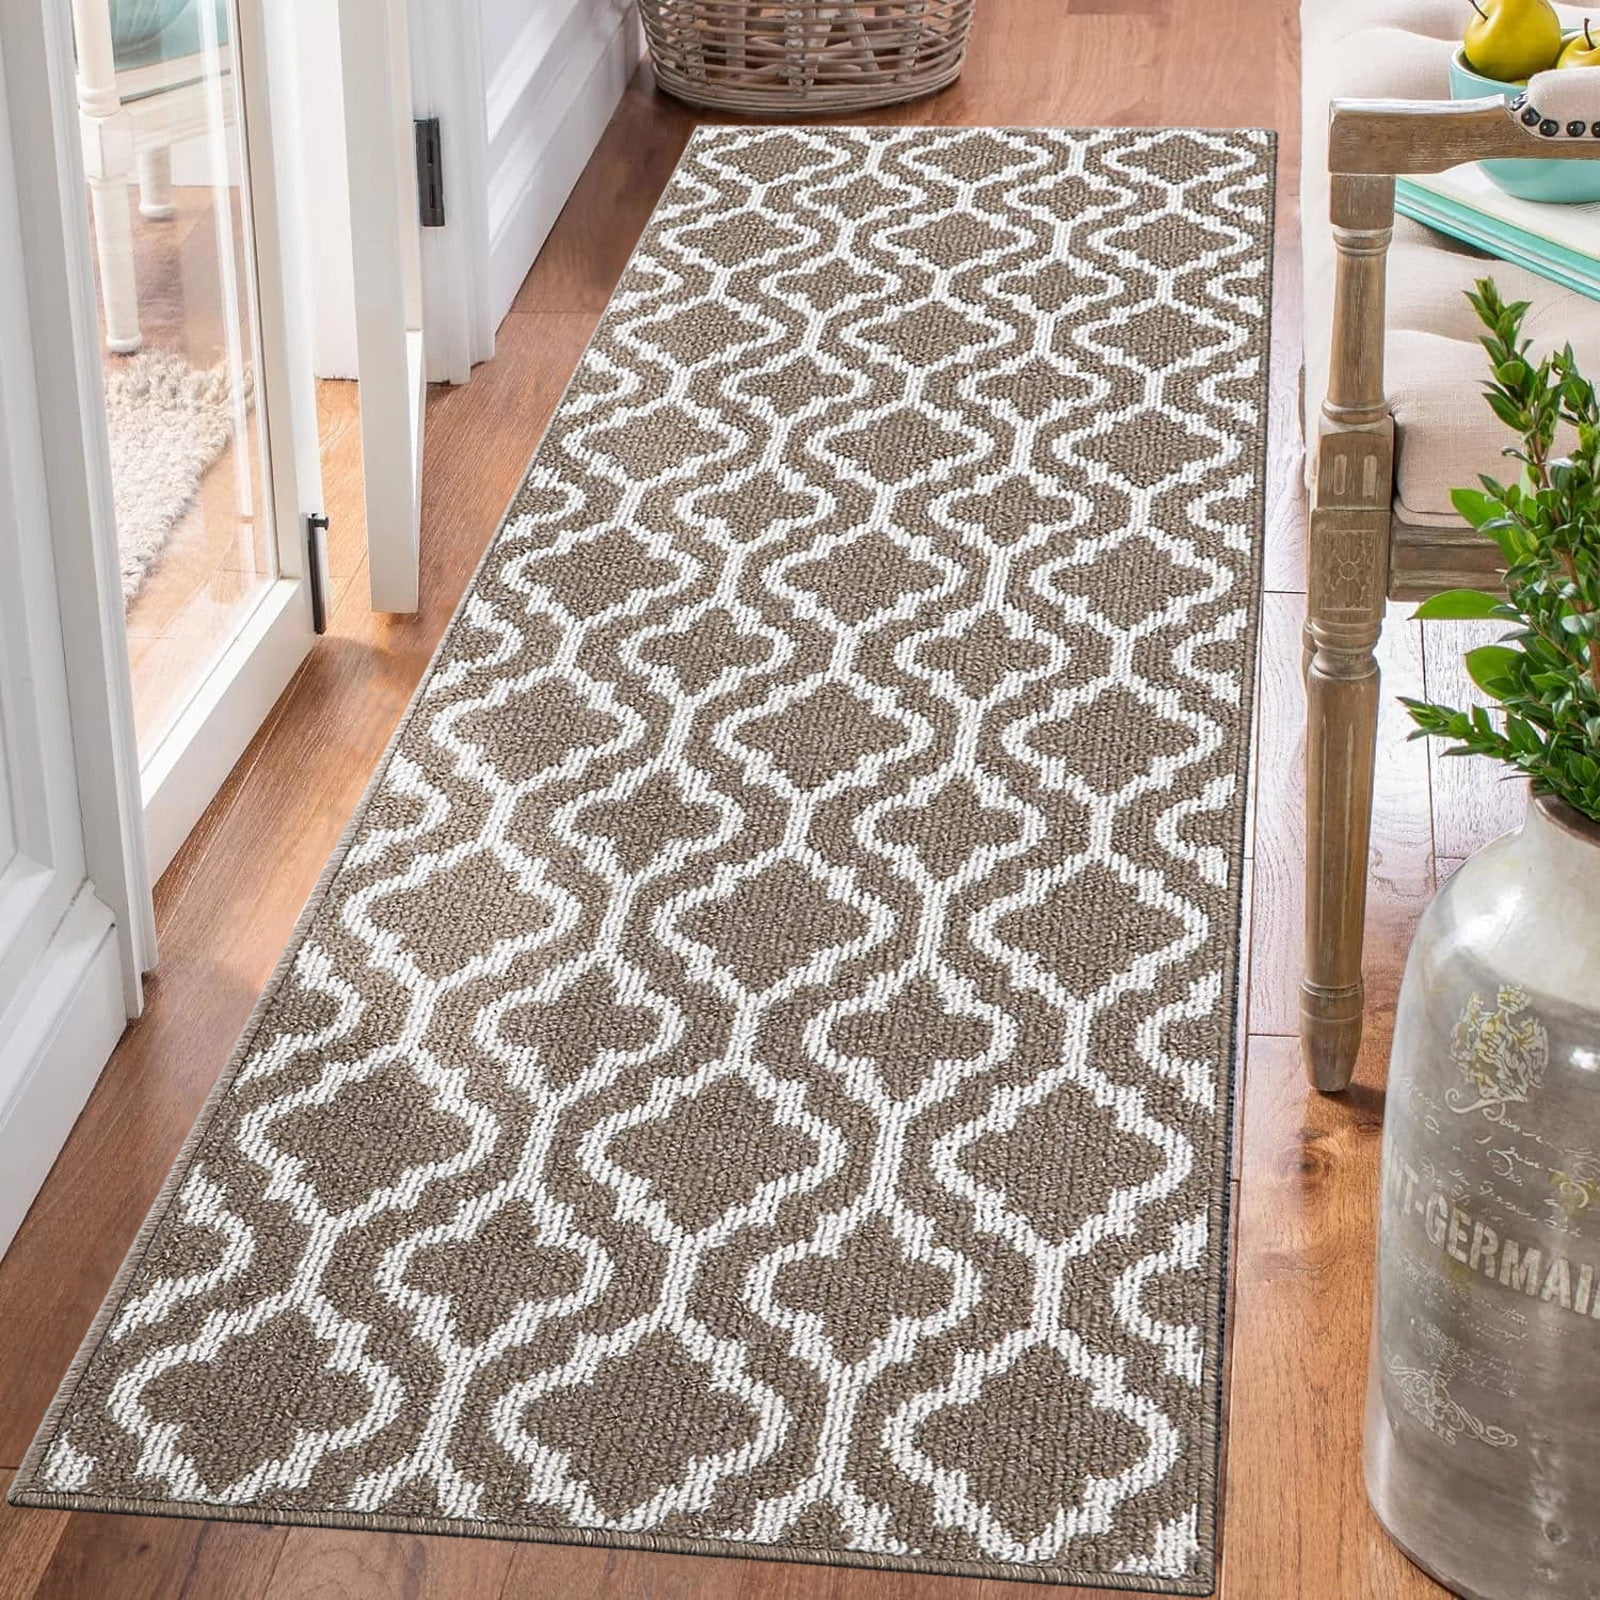  Morefany Outdoor/Indoor 2ft x 60ft Runner Rug, Hallway Custom  Sizes Non-Slip Rubber Backing Area Runner Rugs Waterproof Carpet Rugs for  Kitchen Entryway Balcony Garage Stair Laundry : Patio, Lawn & Garden